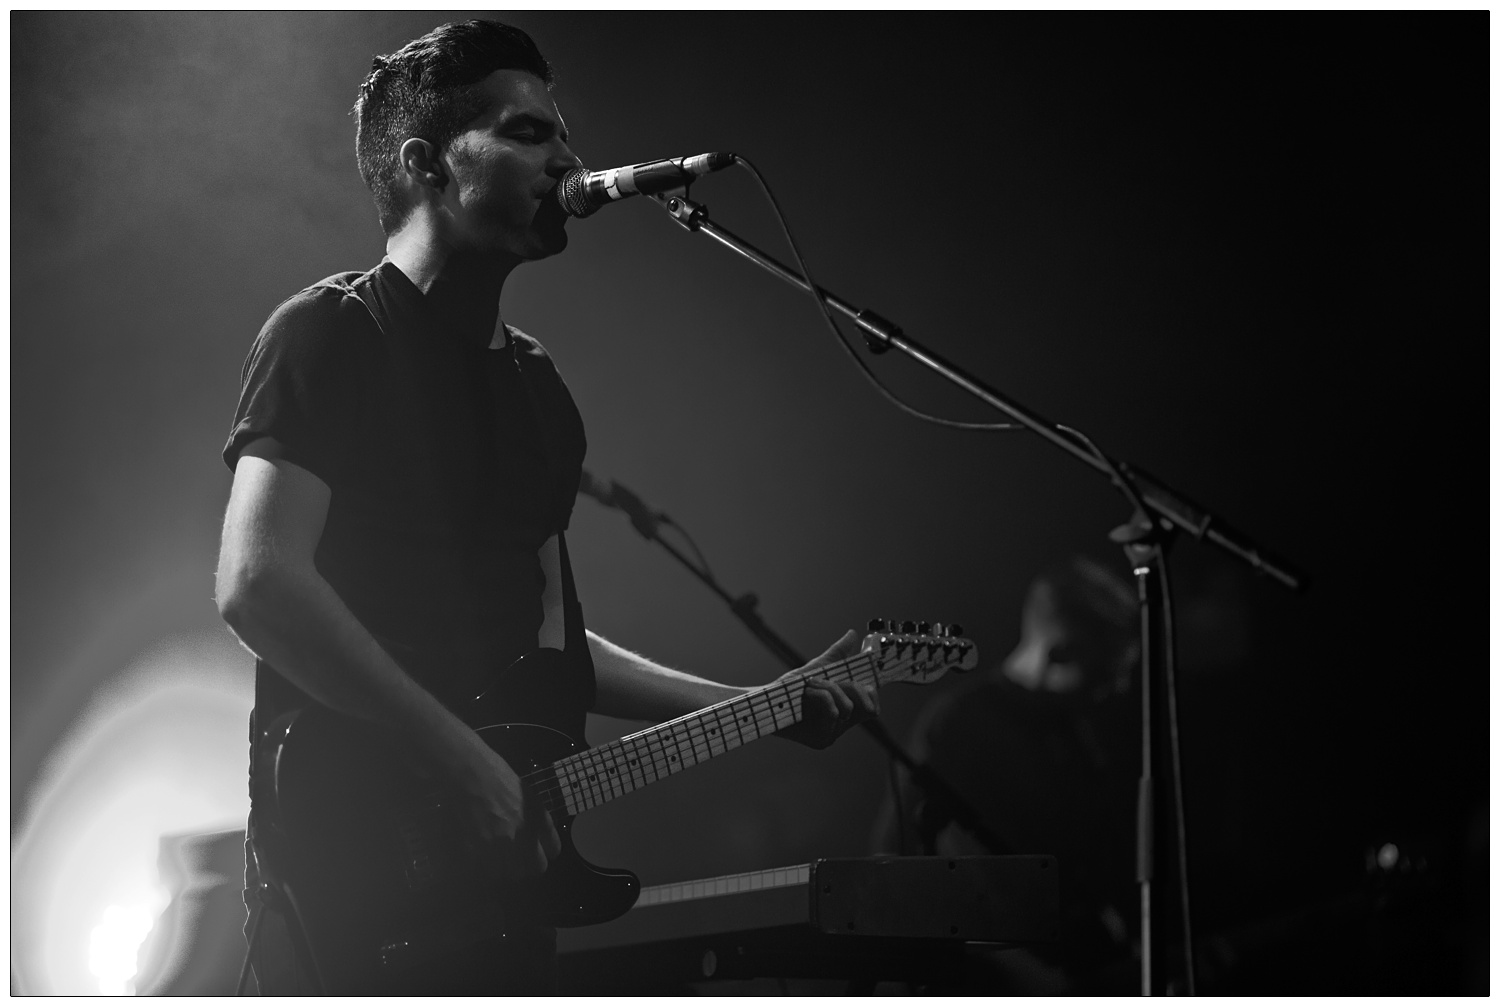 Black and white photograph of Nathan Nicholson performing at The Boxer Rebellion gig at The Forum in 2013